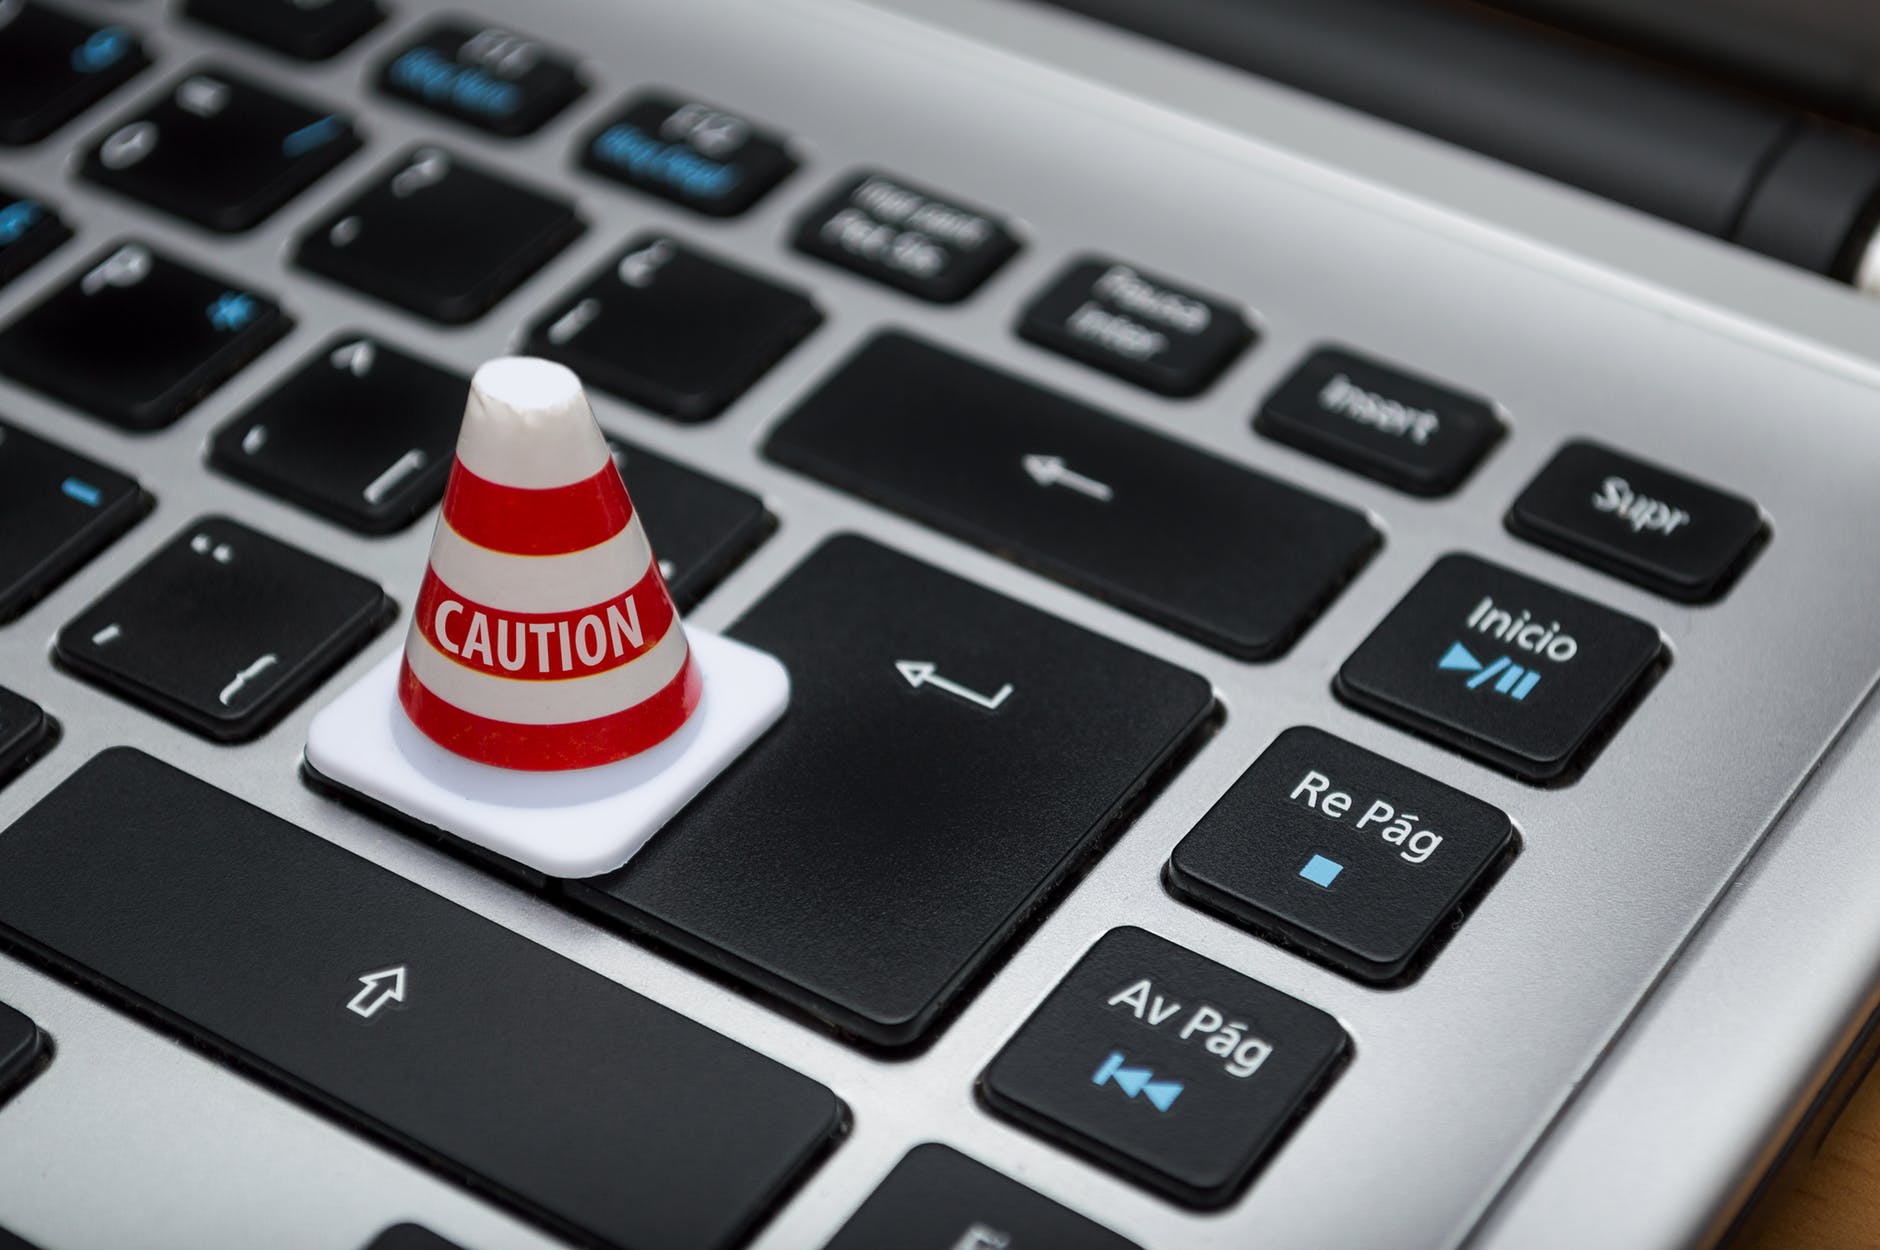 Traffic cone with the word caution on it sitting on a laptop keyboard